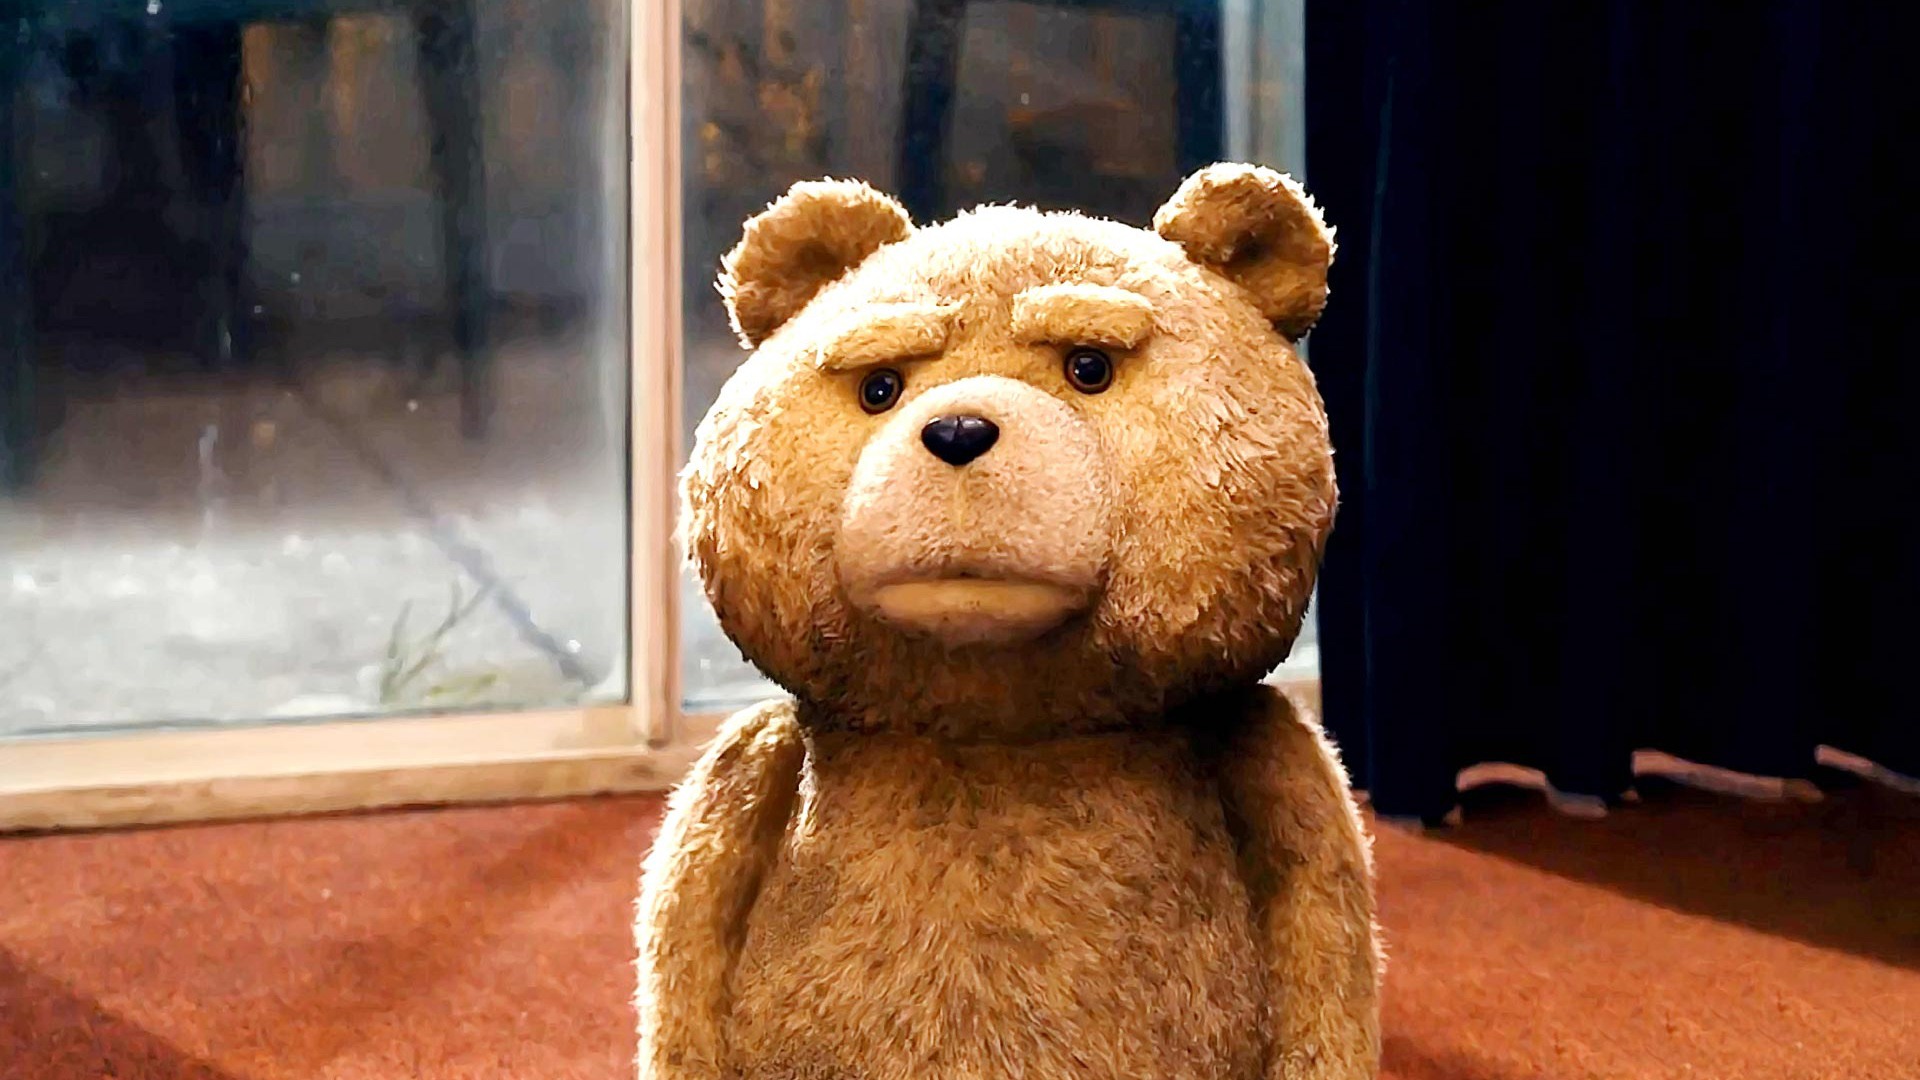 Ted 2012 HD movie wallpapers #17 - 1920x1080